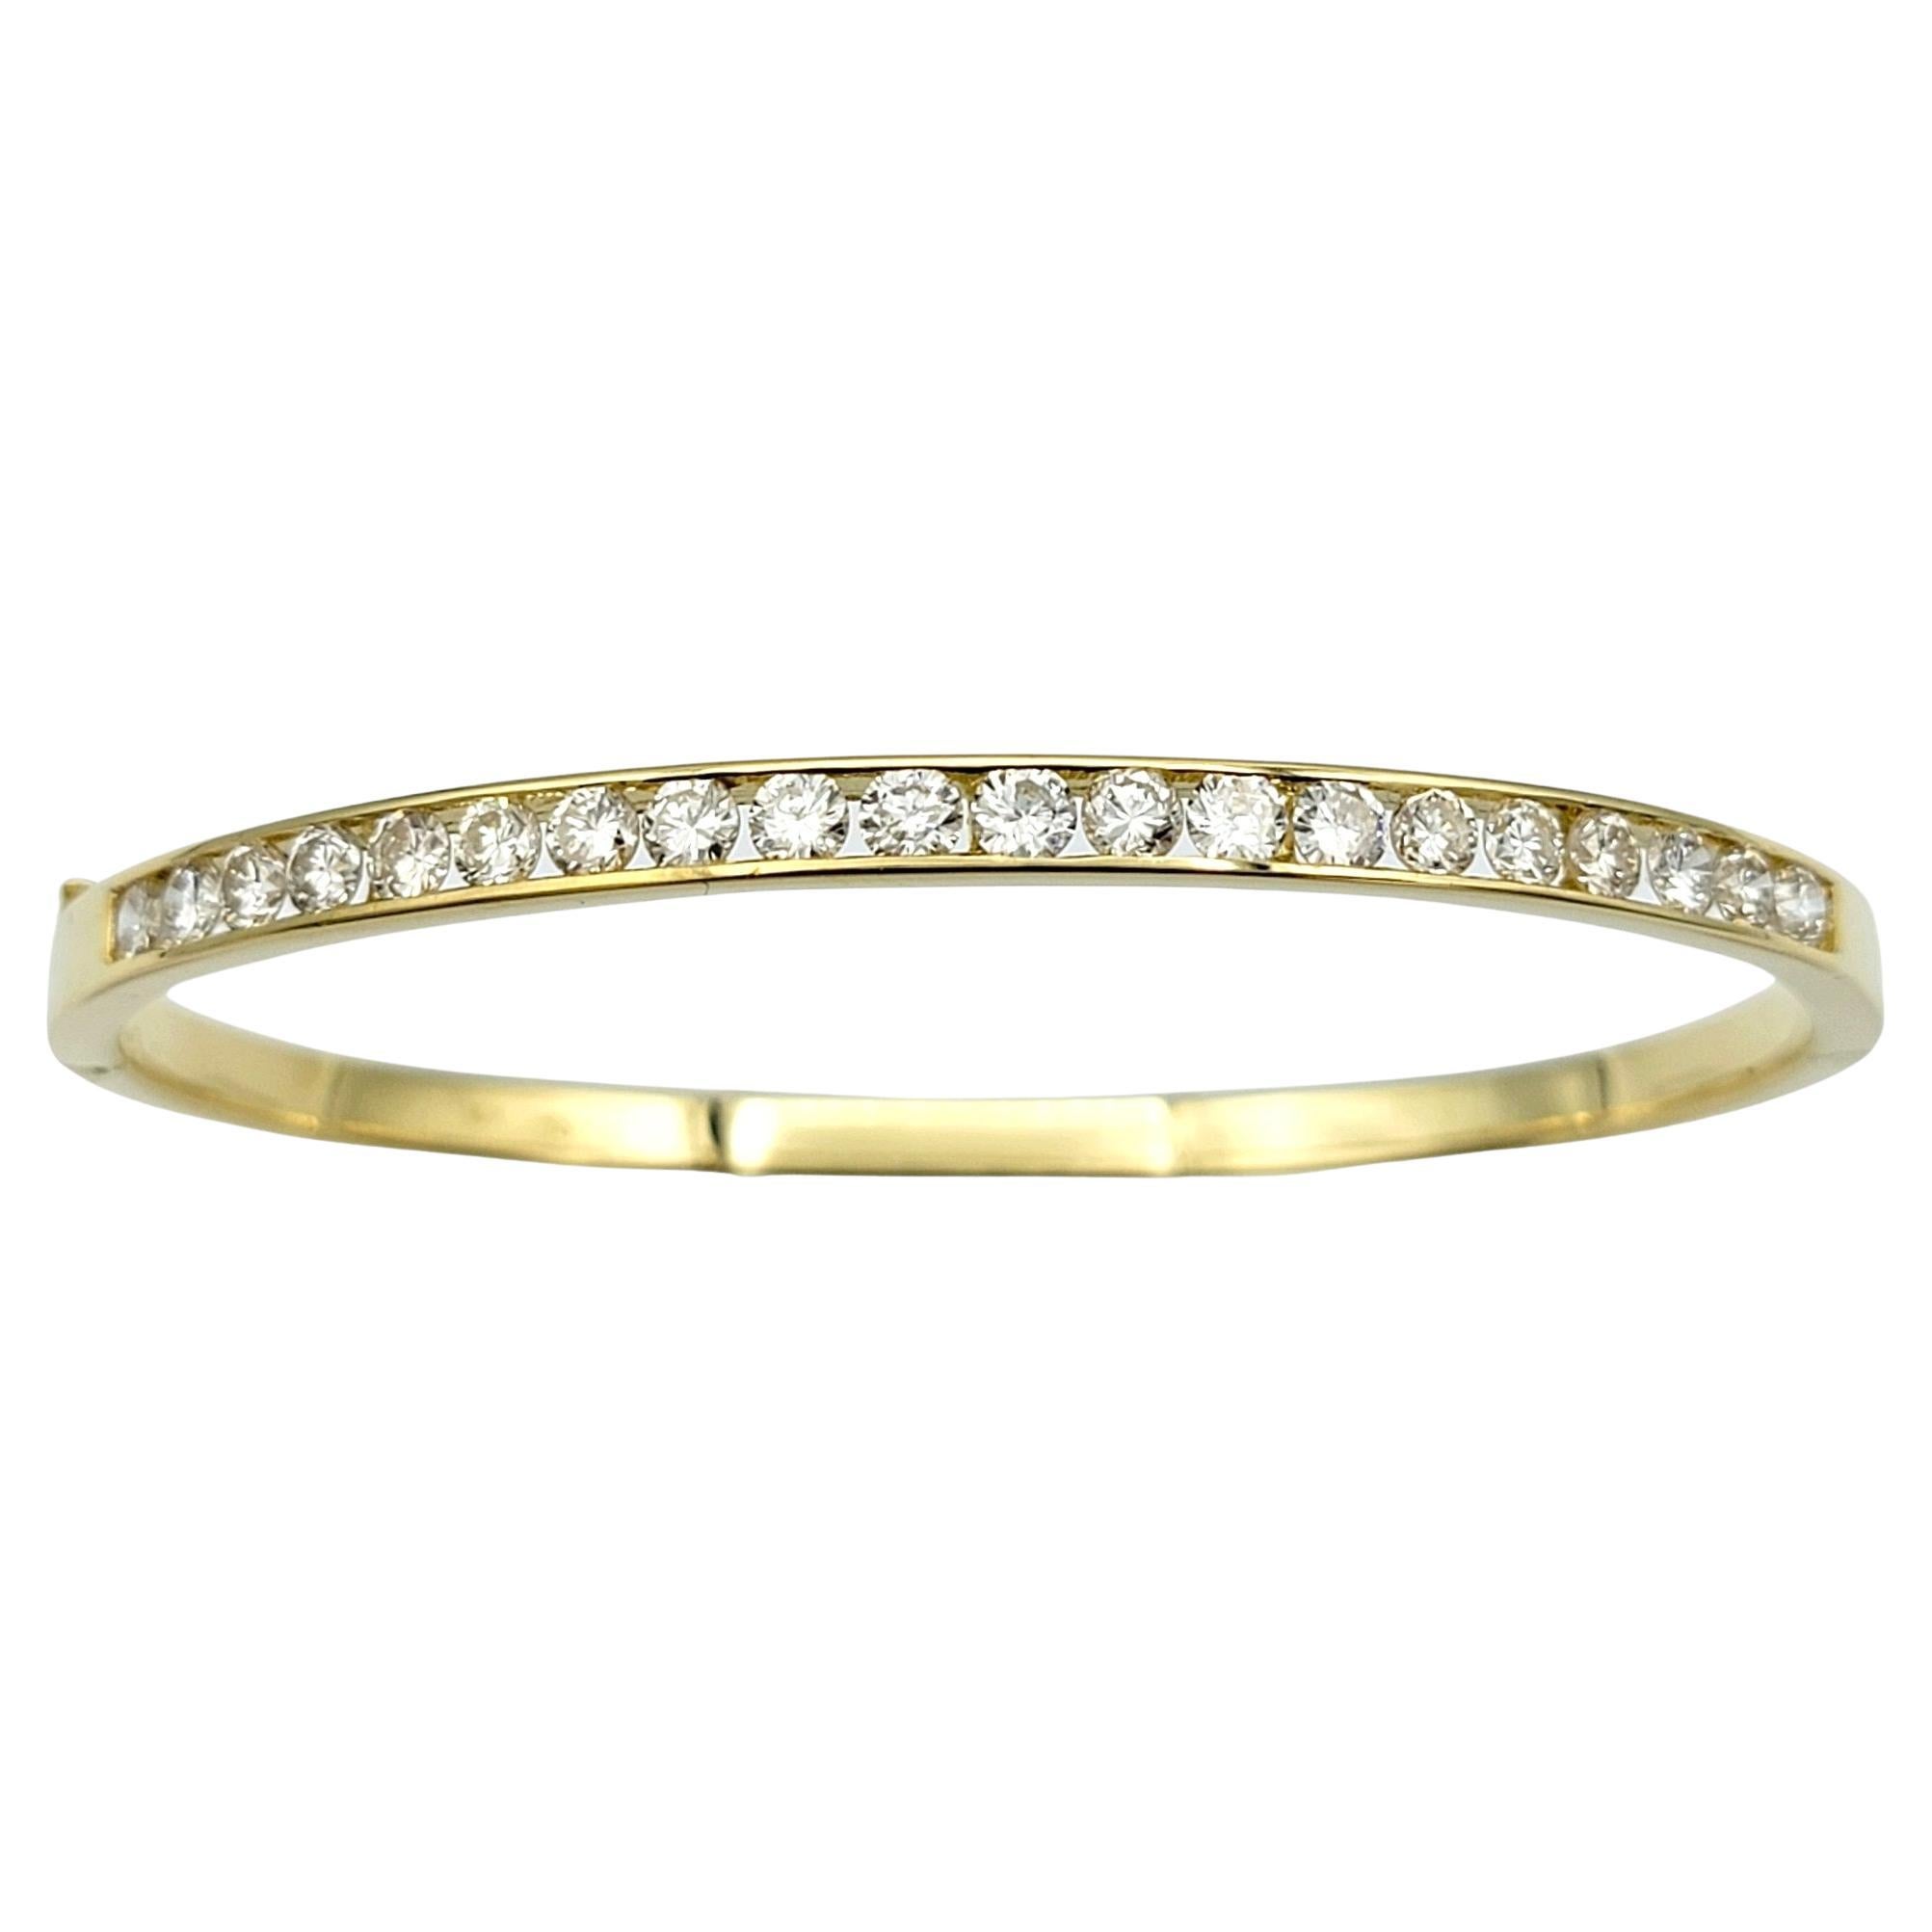 This breathtaking diamond hinged bangle bracelet exudes sophistication and luxury with its sleek design and brilliant sparkle. Crafted from lustrous 18 karat yellow gold, the bangle features a row of 20 dazzling round diamonds securely nestled